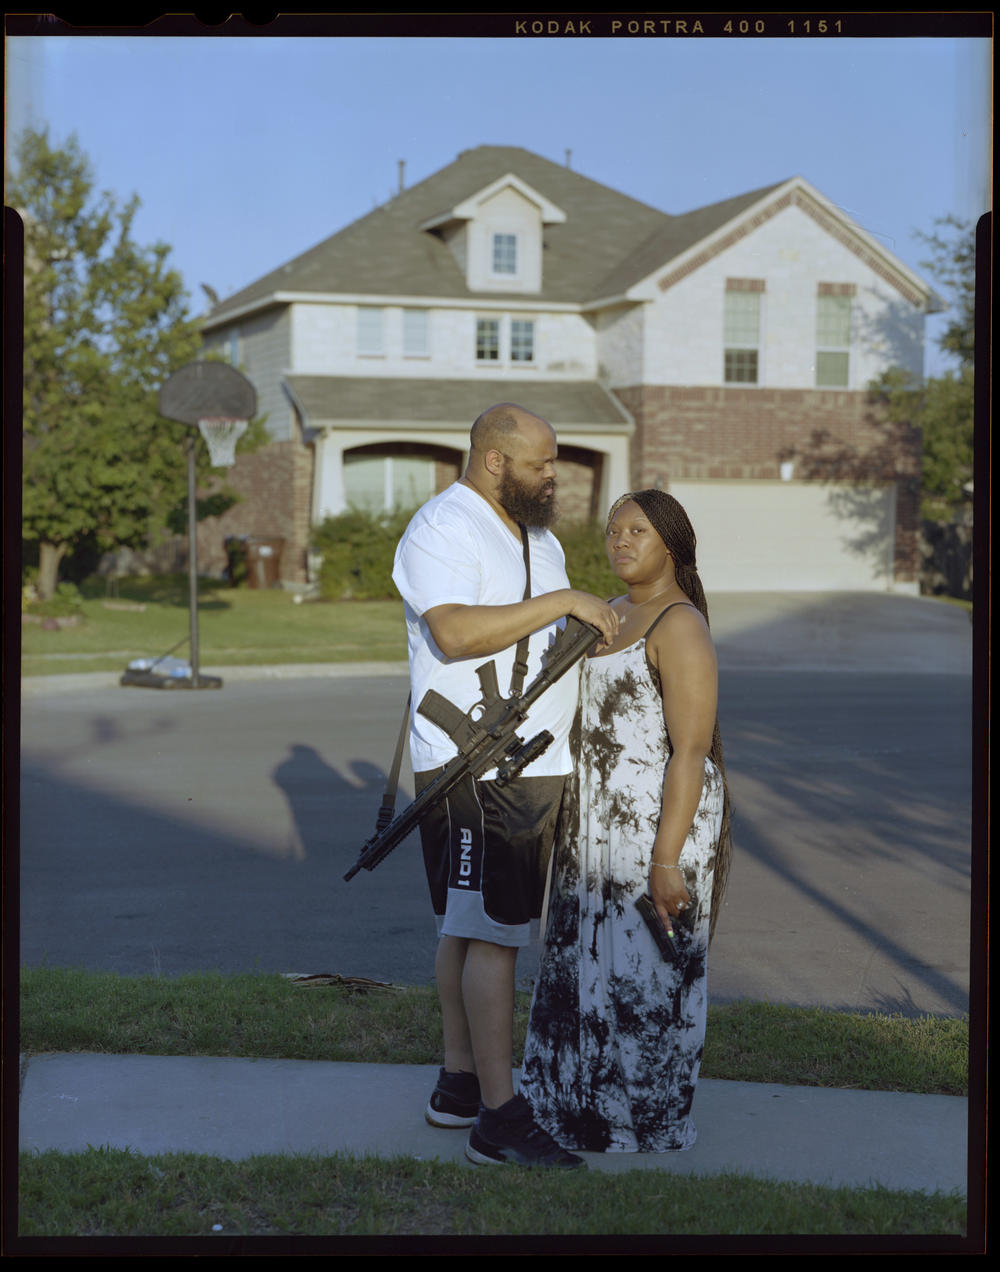 Justin Barlow, 34, left, gazes at his wife, Cha'von Barlow, 33, outside their home on Saturday, June 18, 2021, in Round Rock, Texas. 